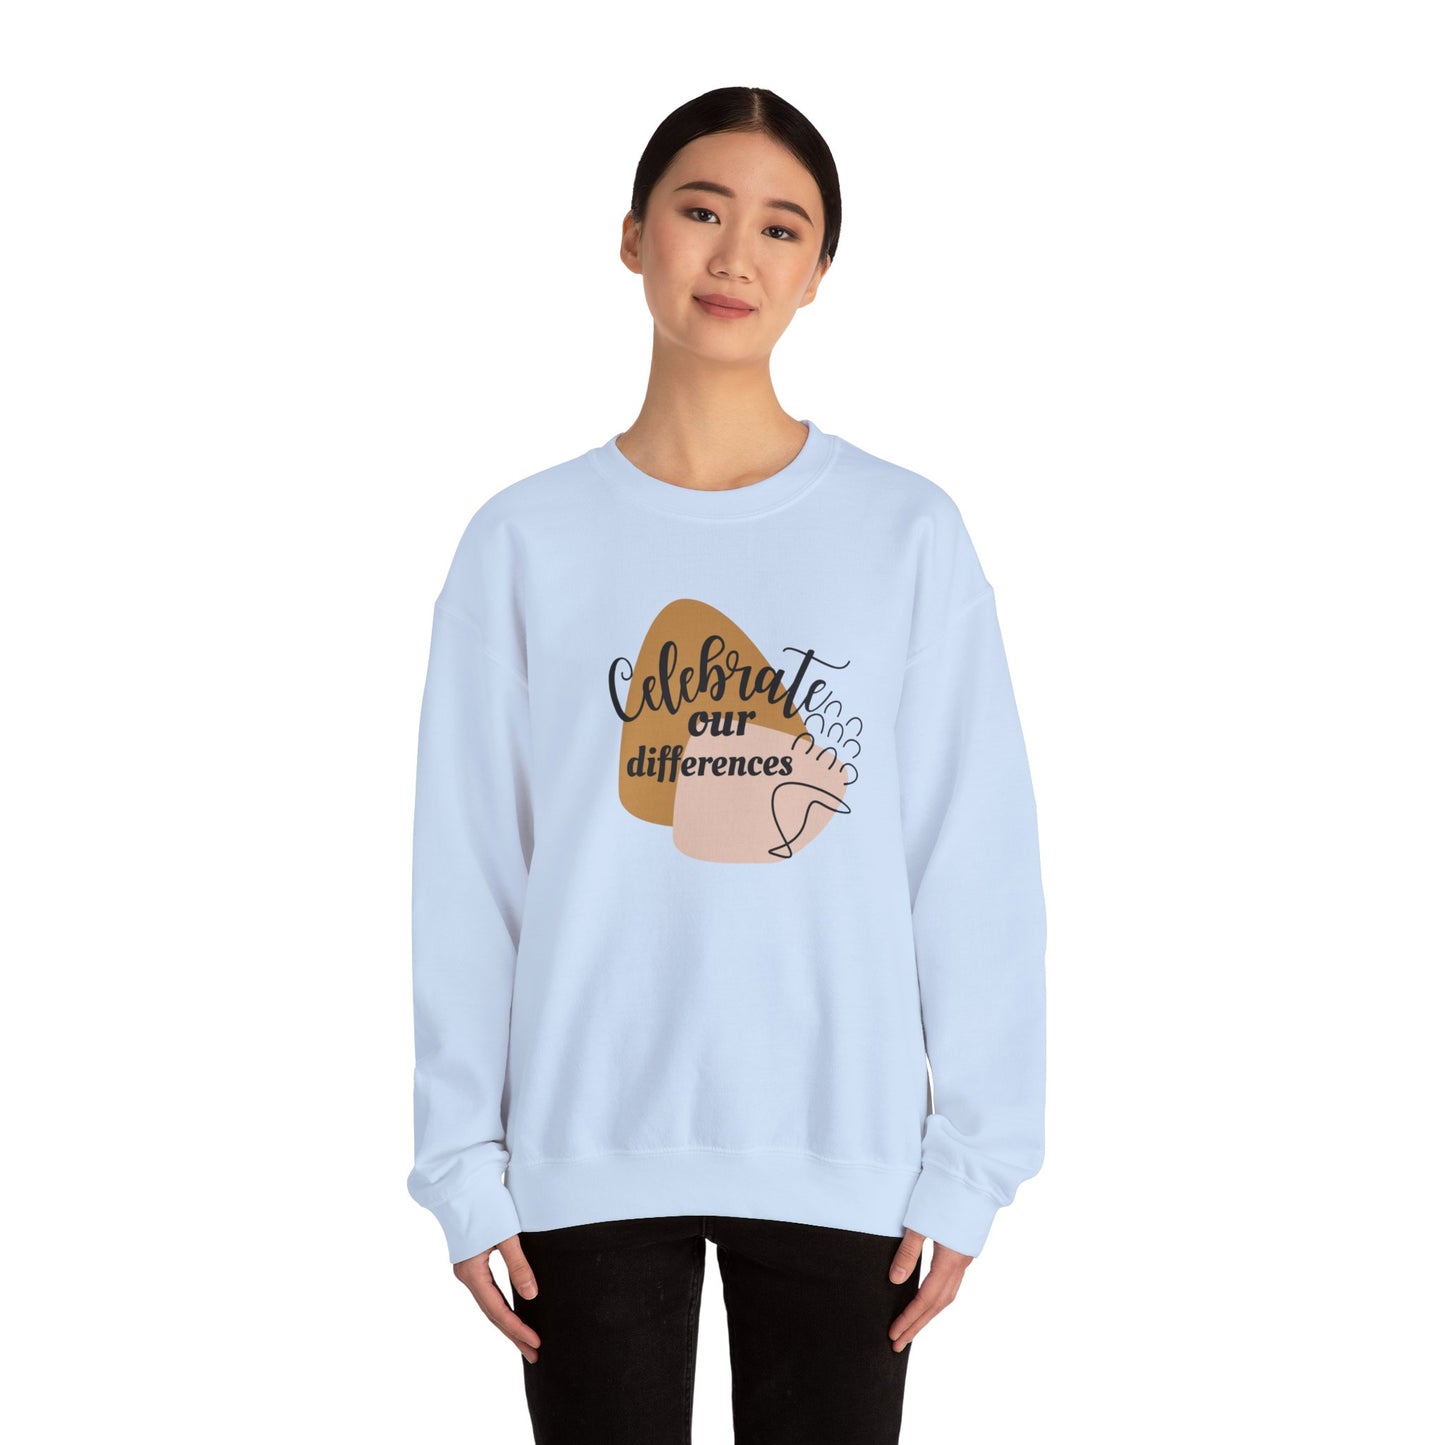 Autism awareness sweatshirt - Celebrate our differences quote - Autism Awareness gift